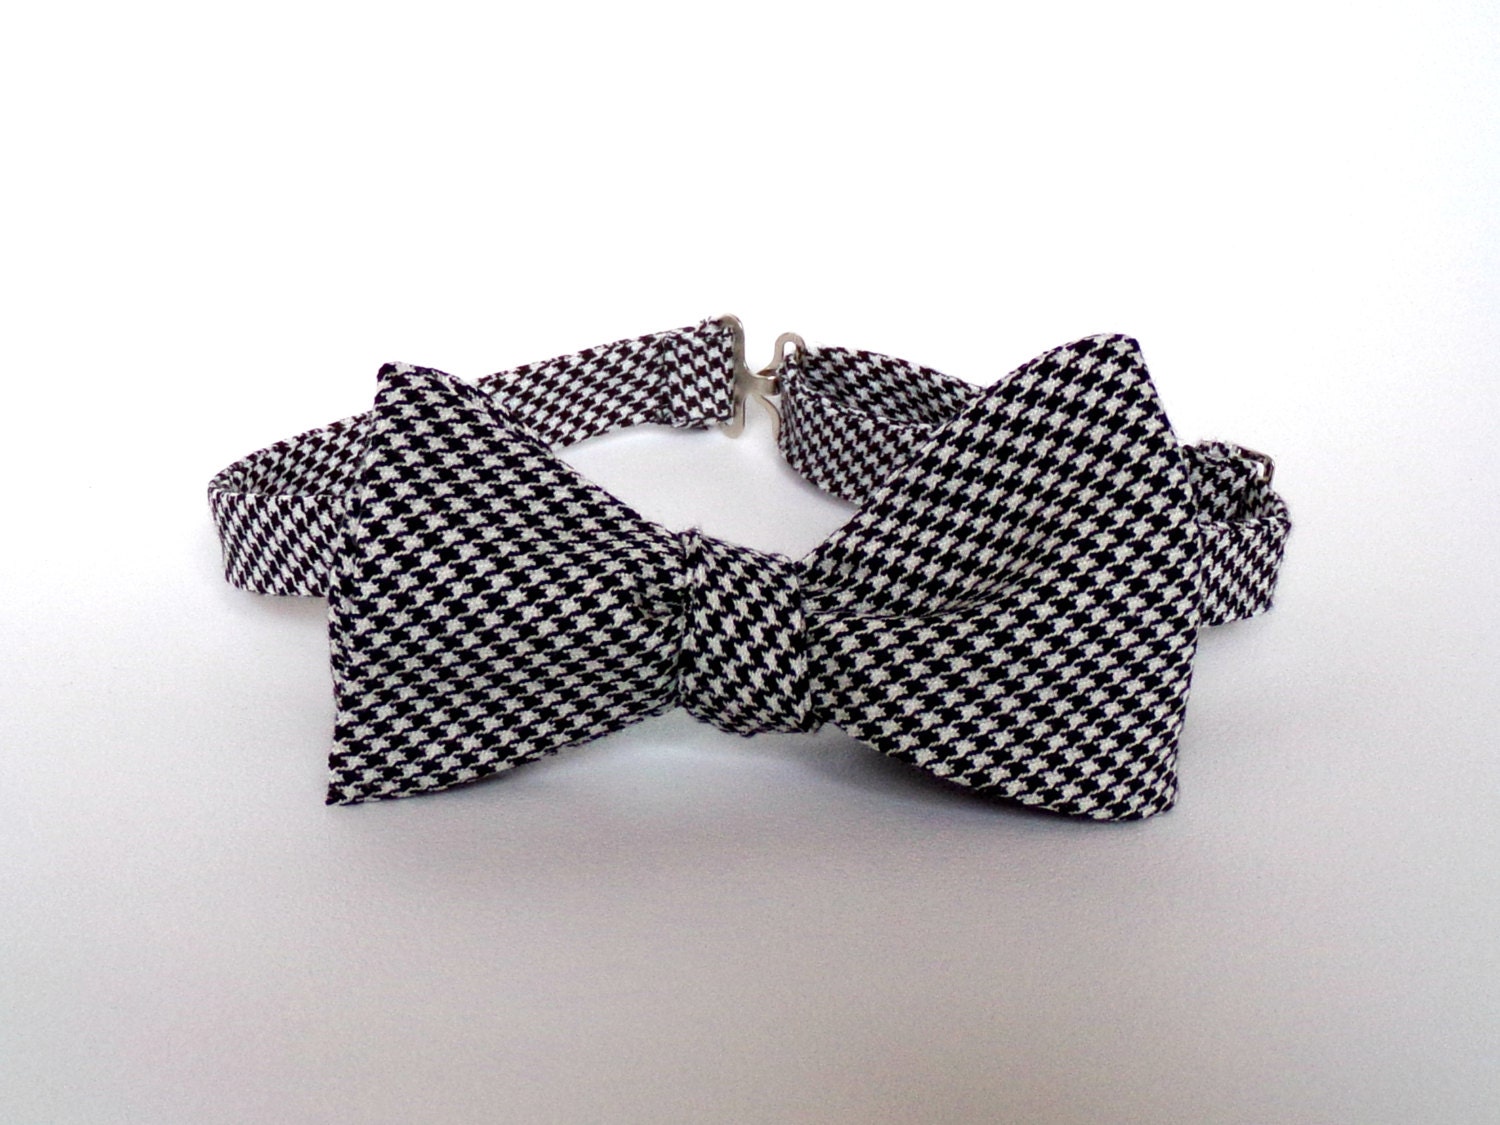 Black and White Houndstooth Bow Tie Self Tie Neutral Classic | Etsy